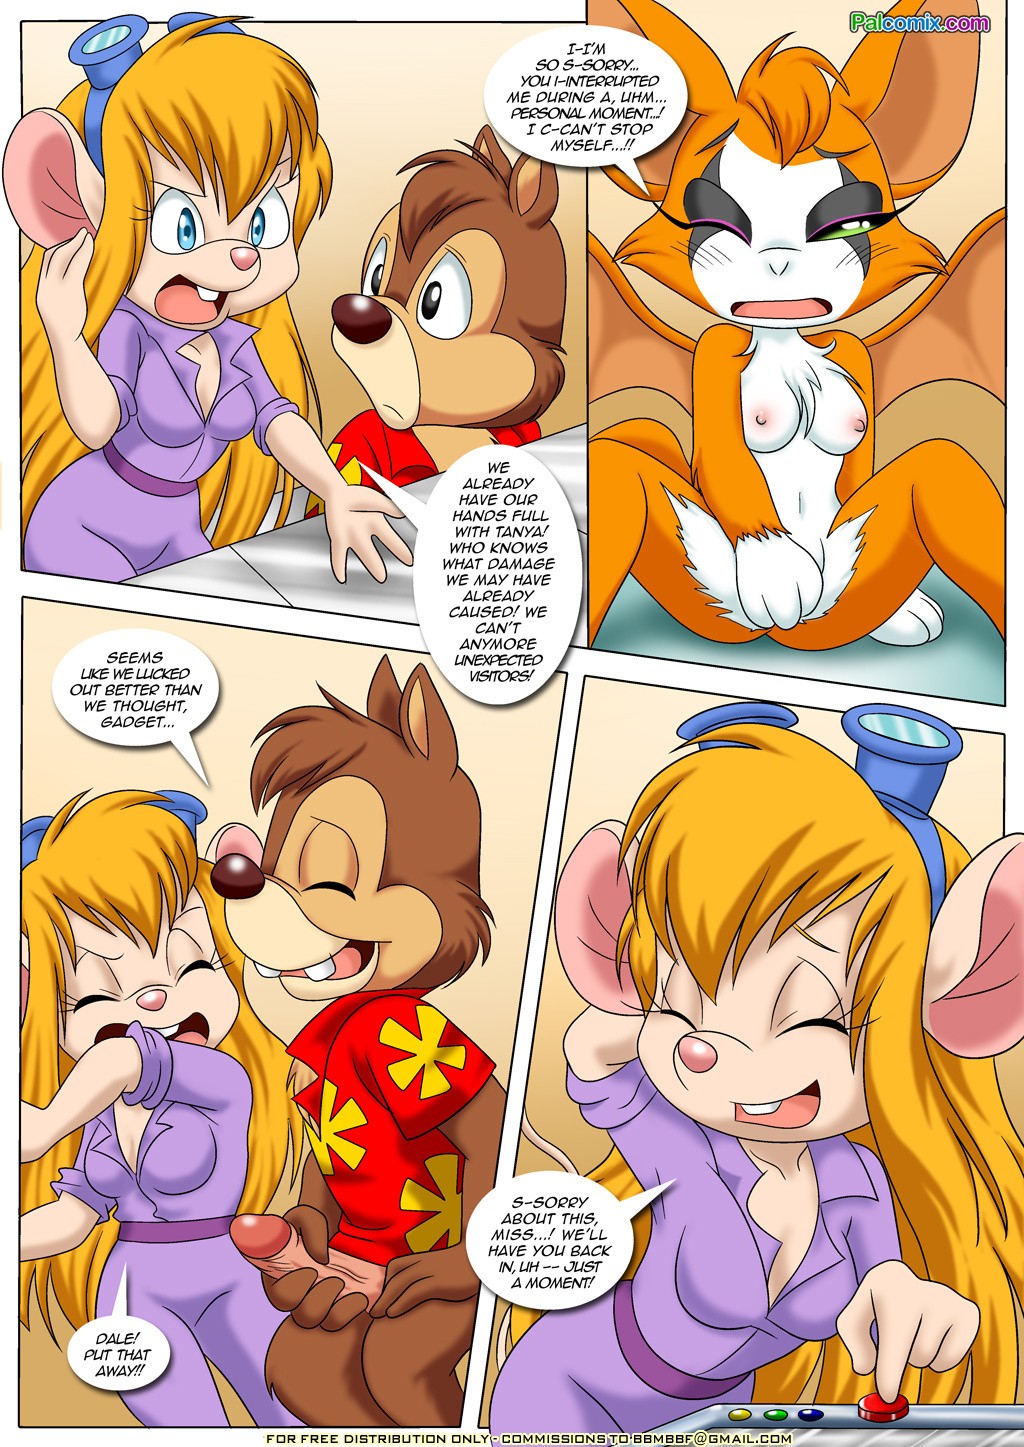 Rescue Rodents 5 - Of Mice and Machines porn comic picture 9